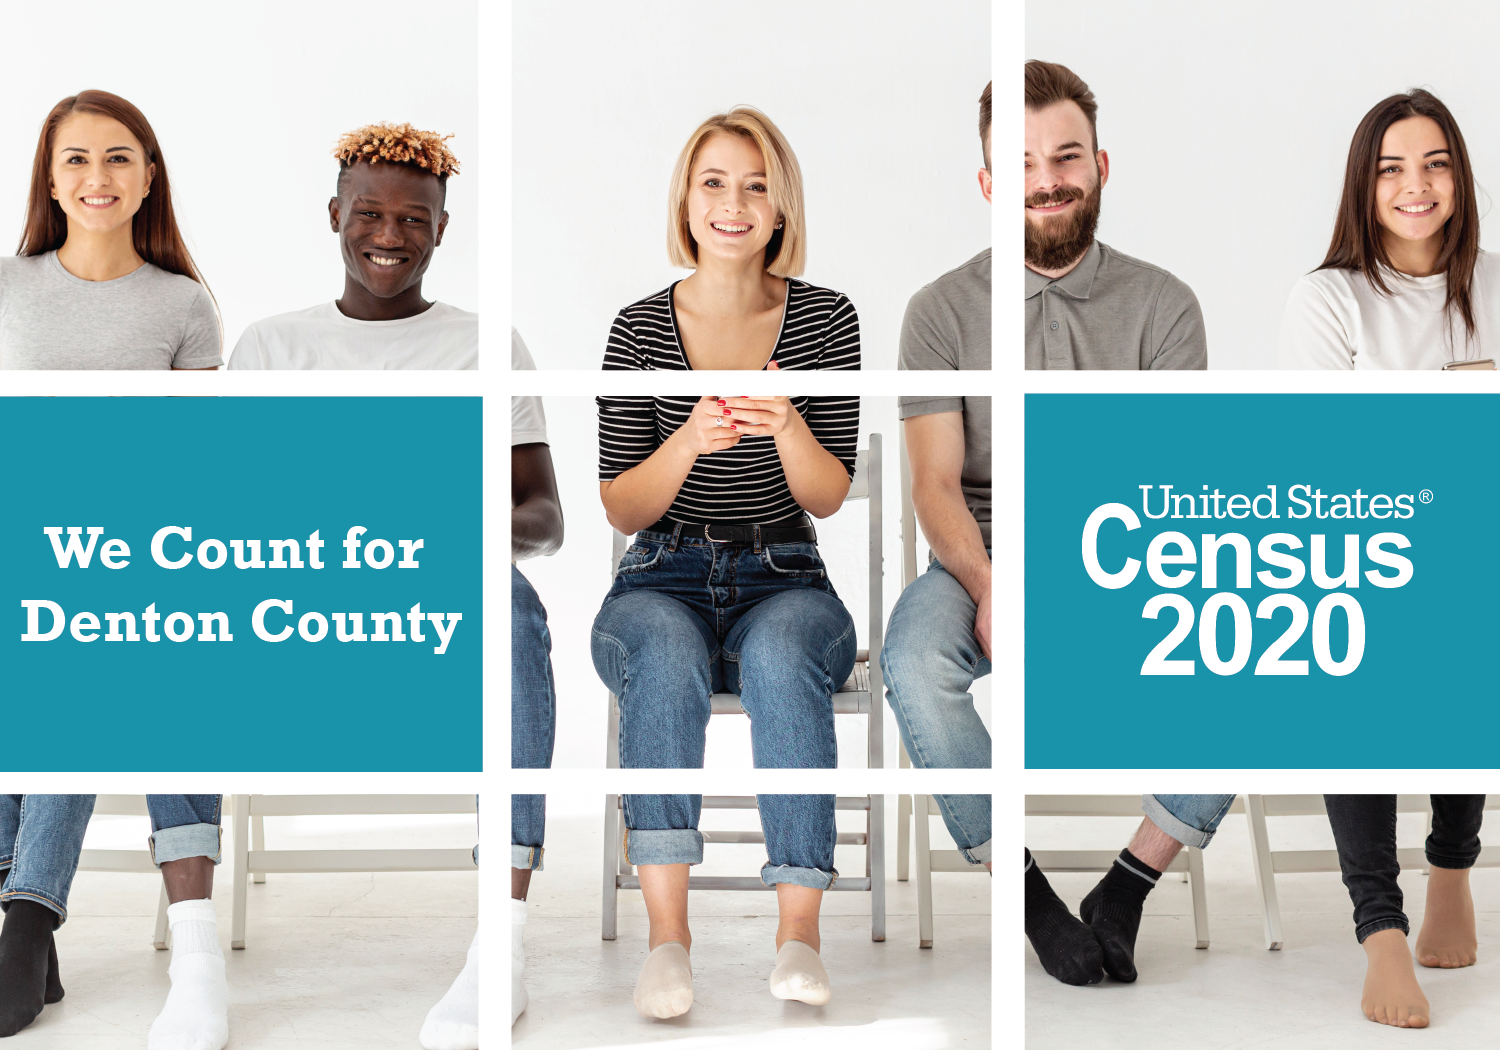 Top 3 Reasons to Participate in the 2020 U.S. Census